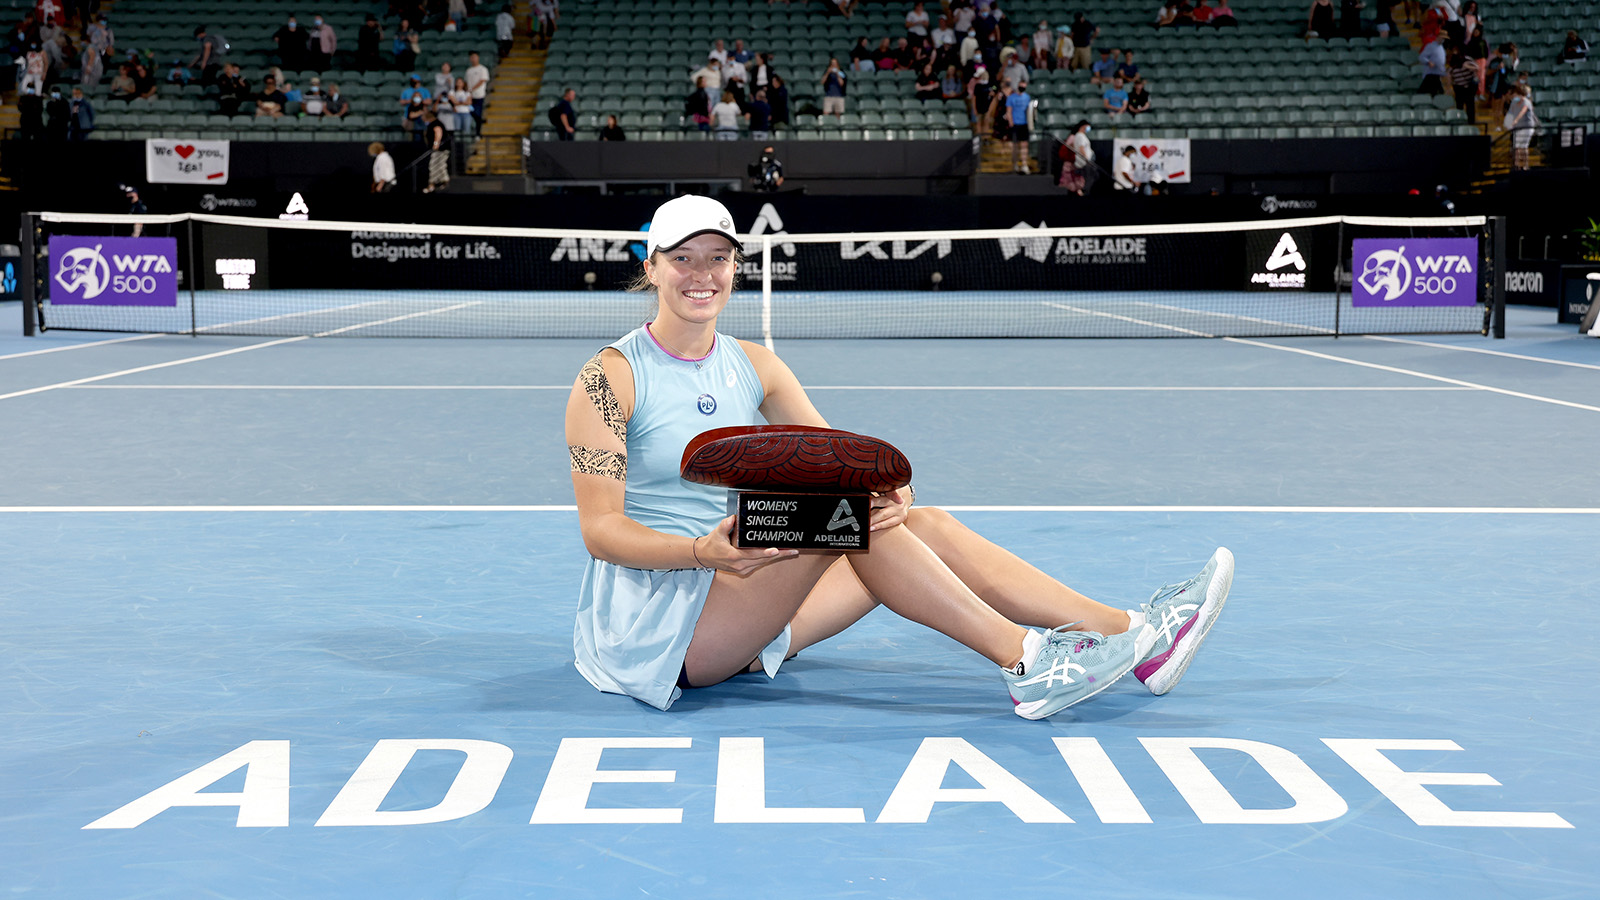 Iga Swiatek celebrates with her trophy after defeating Belinda Bencic in the final of the Adelaide International.